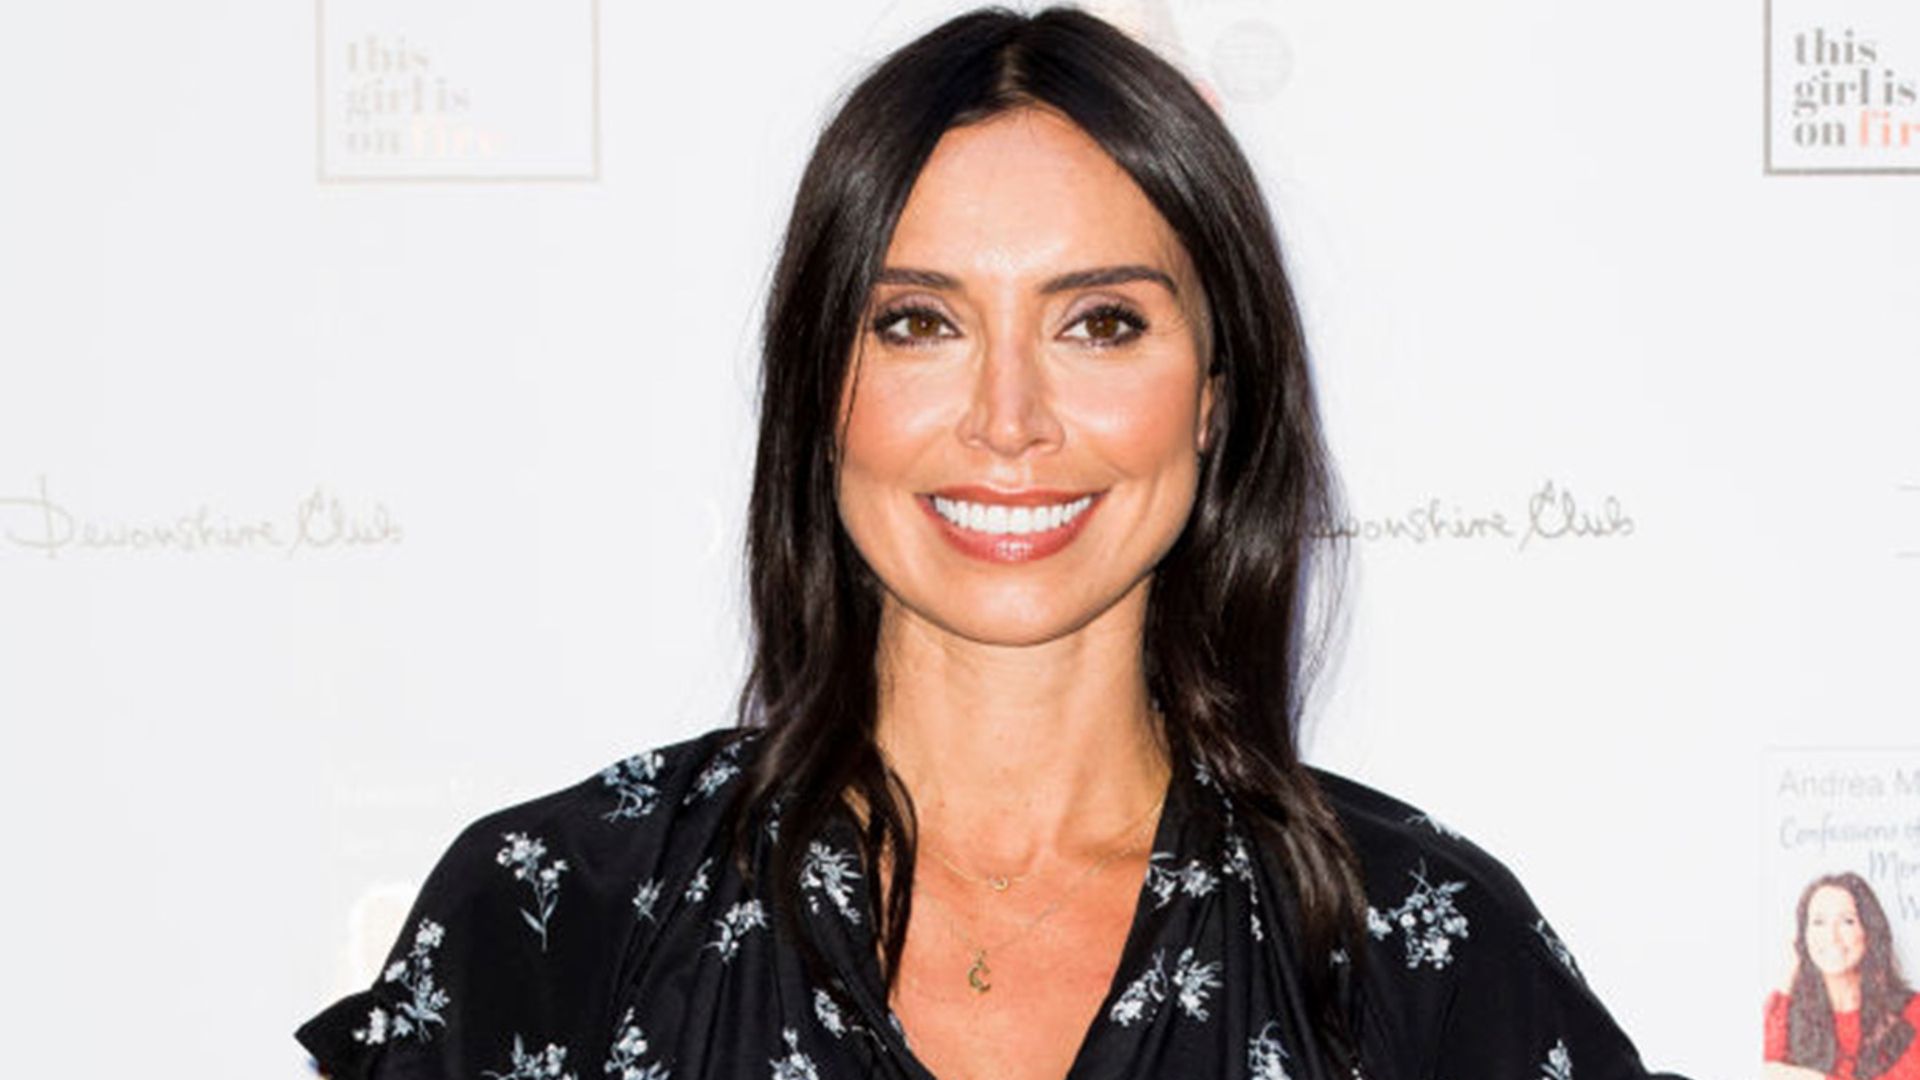 Christine Lampard sends fans wild in plunging floral dress | HELLO!